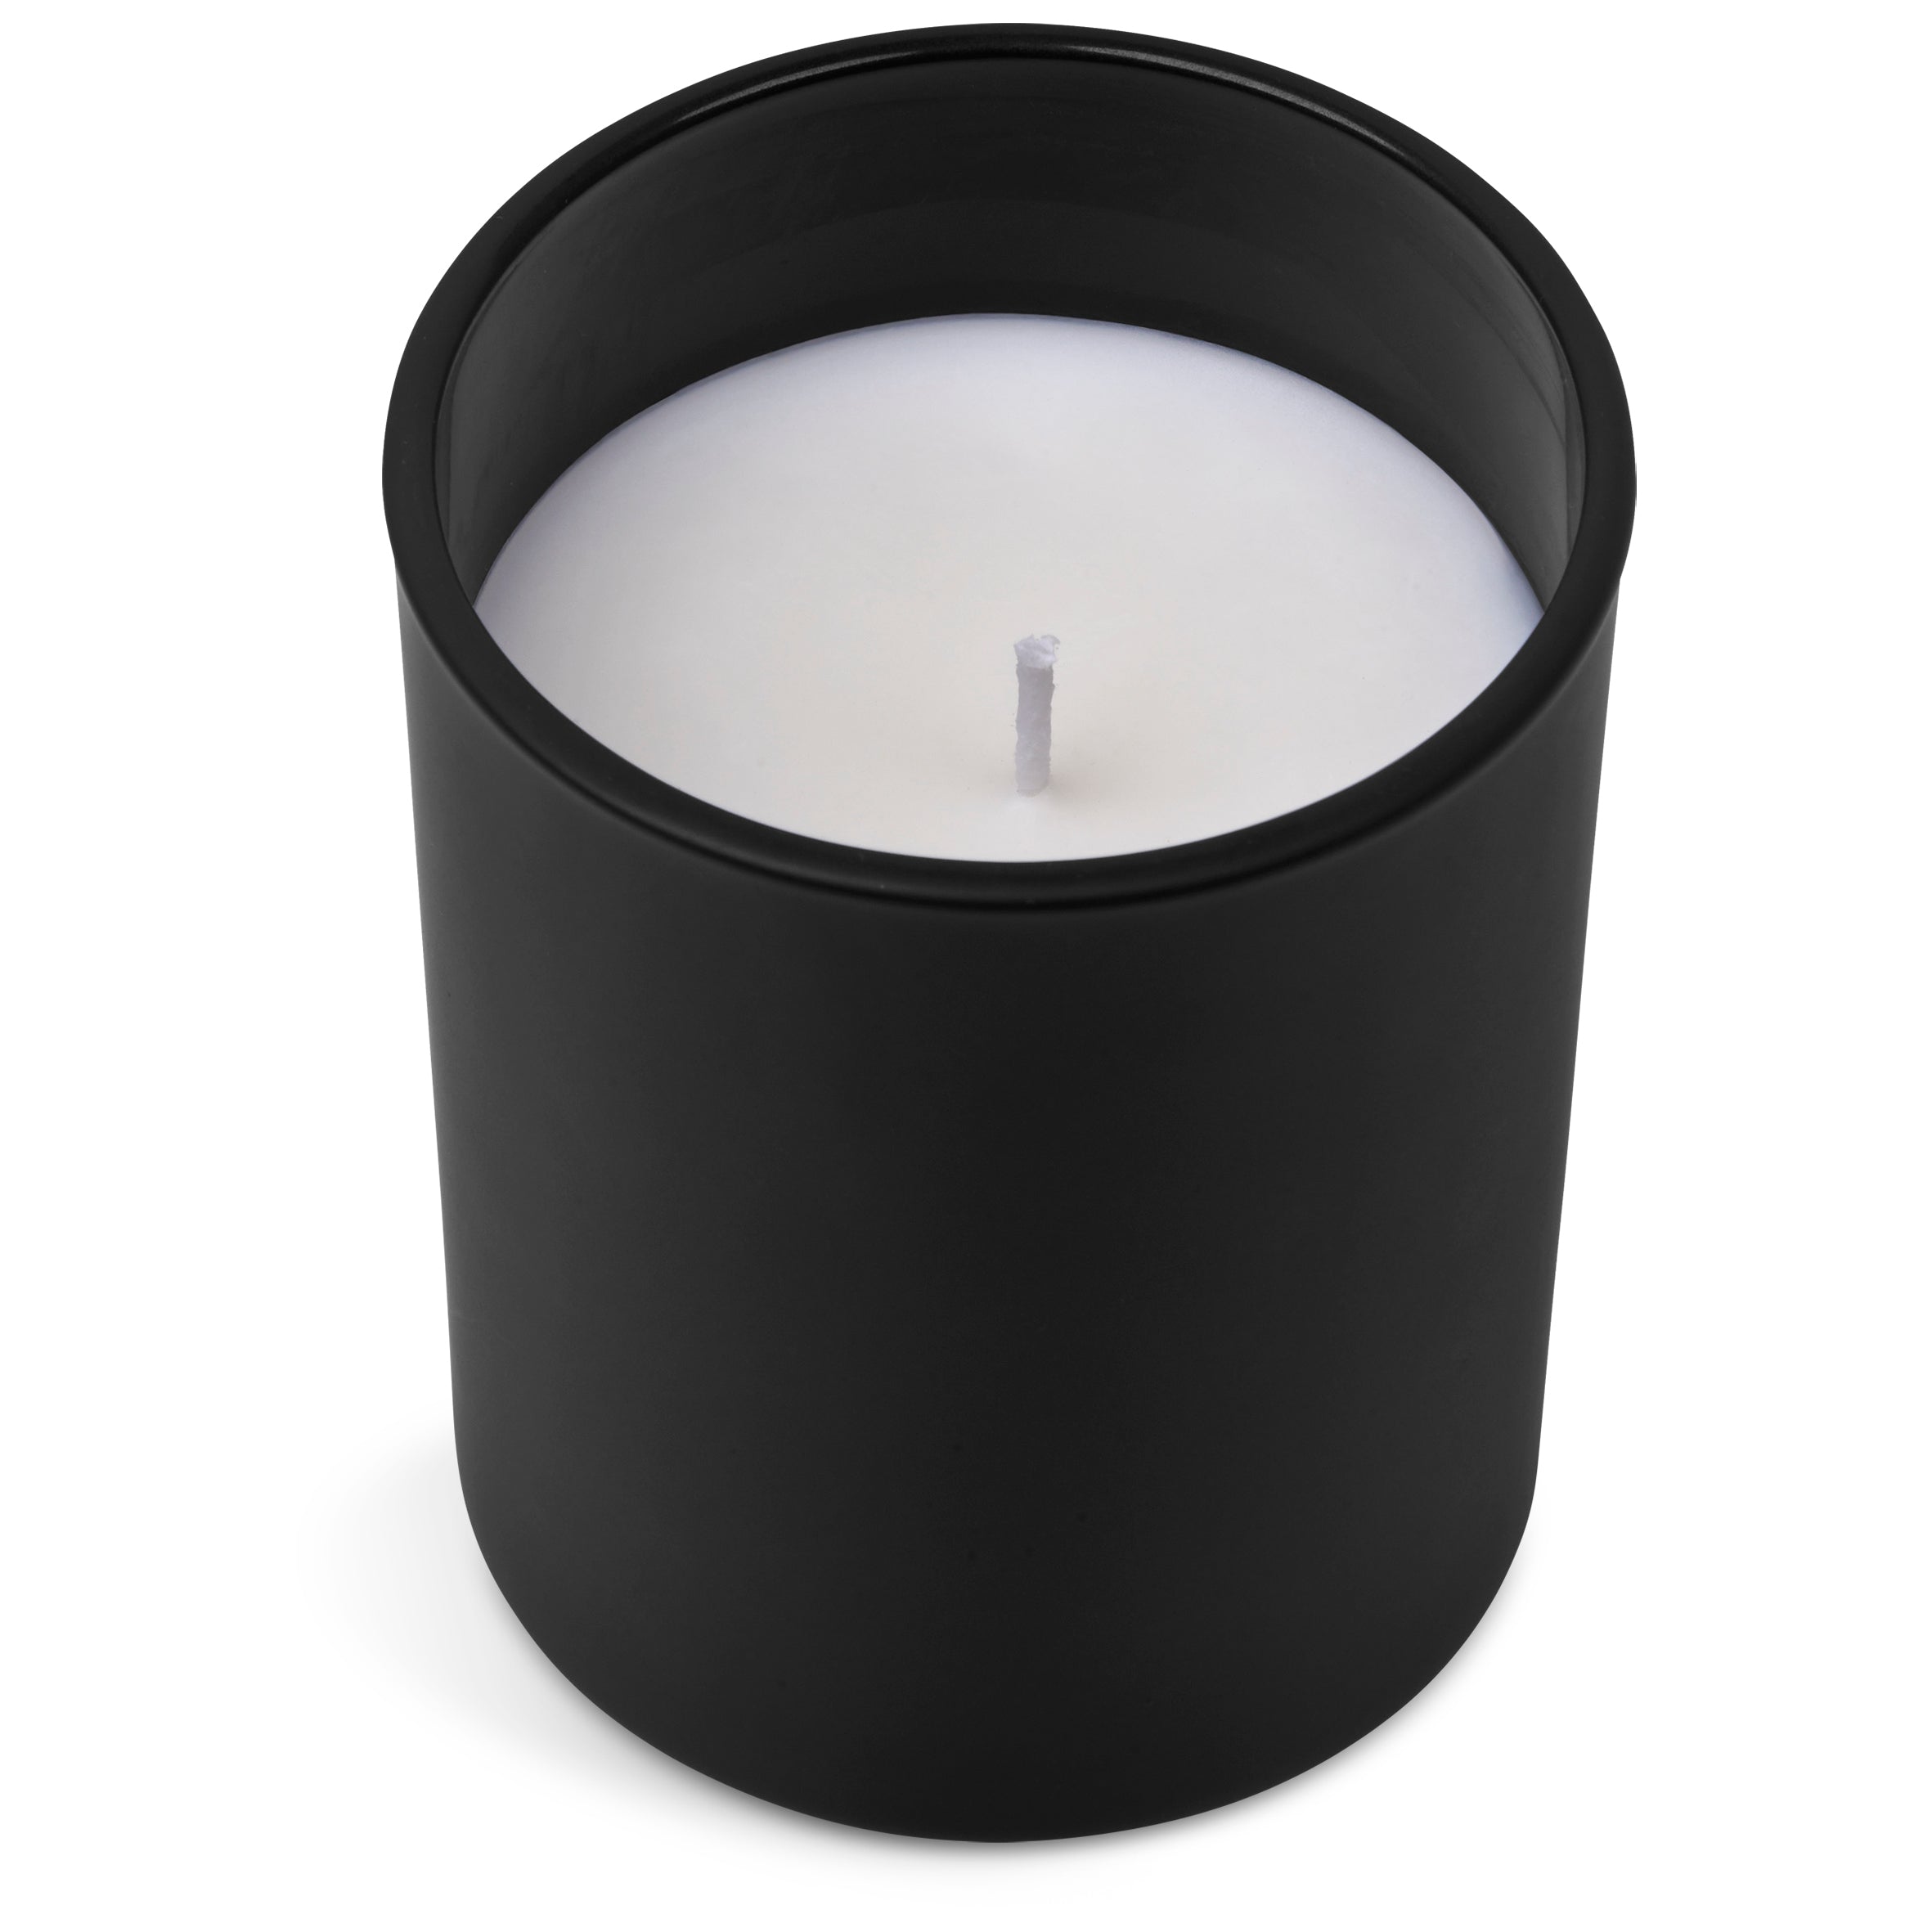 Re-Enliven Scented Candle